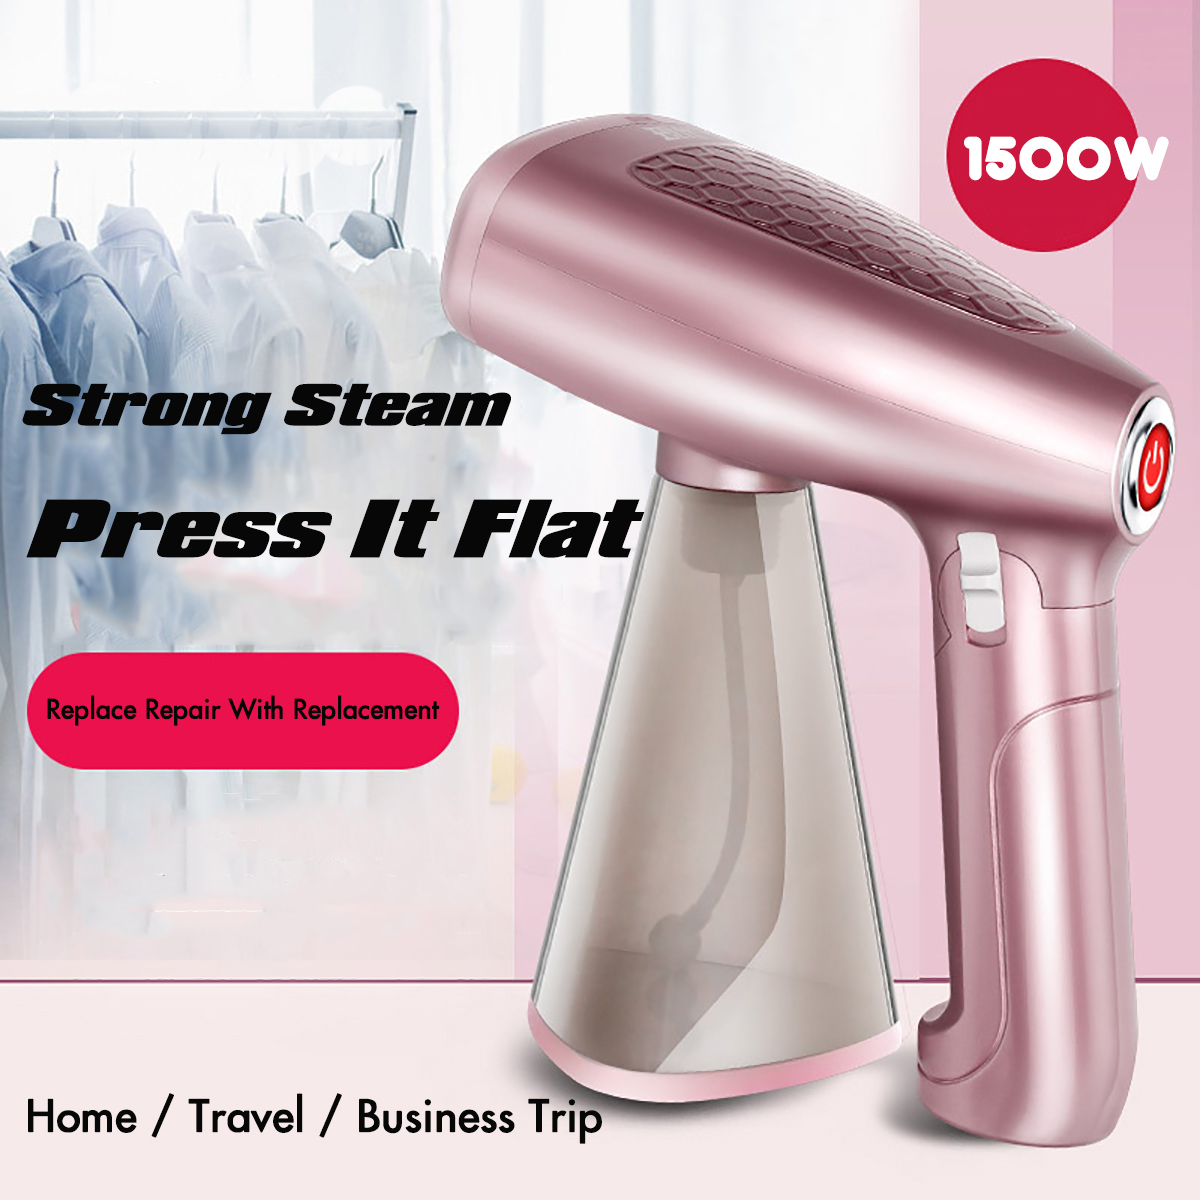 Portable-Garment-Steamer-1500W-Powerful-Clothes-Steam-Iron-Fast-Heat-up-Fabric-Wrinkle-Removal-320ml-1769367-6